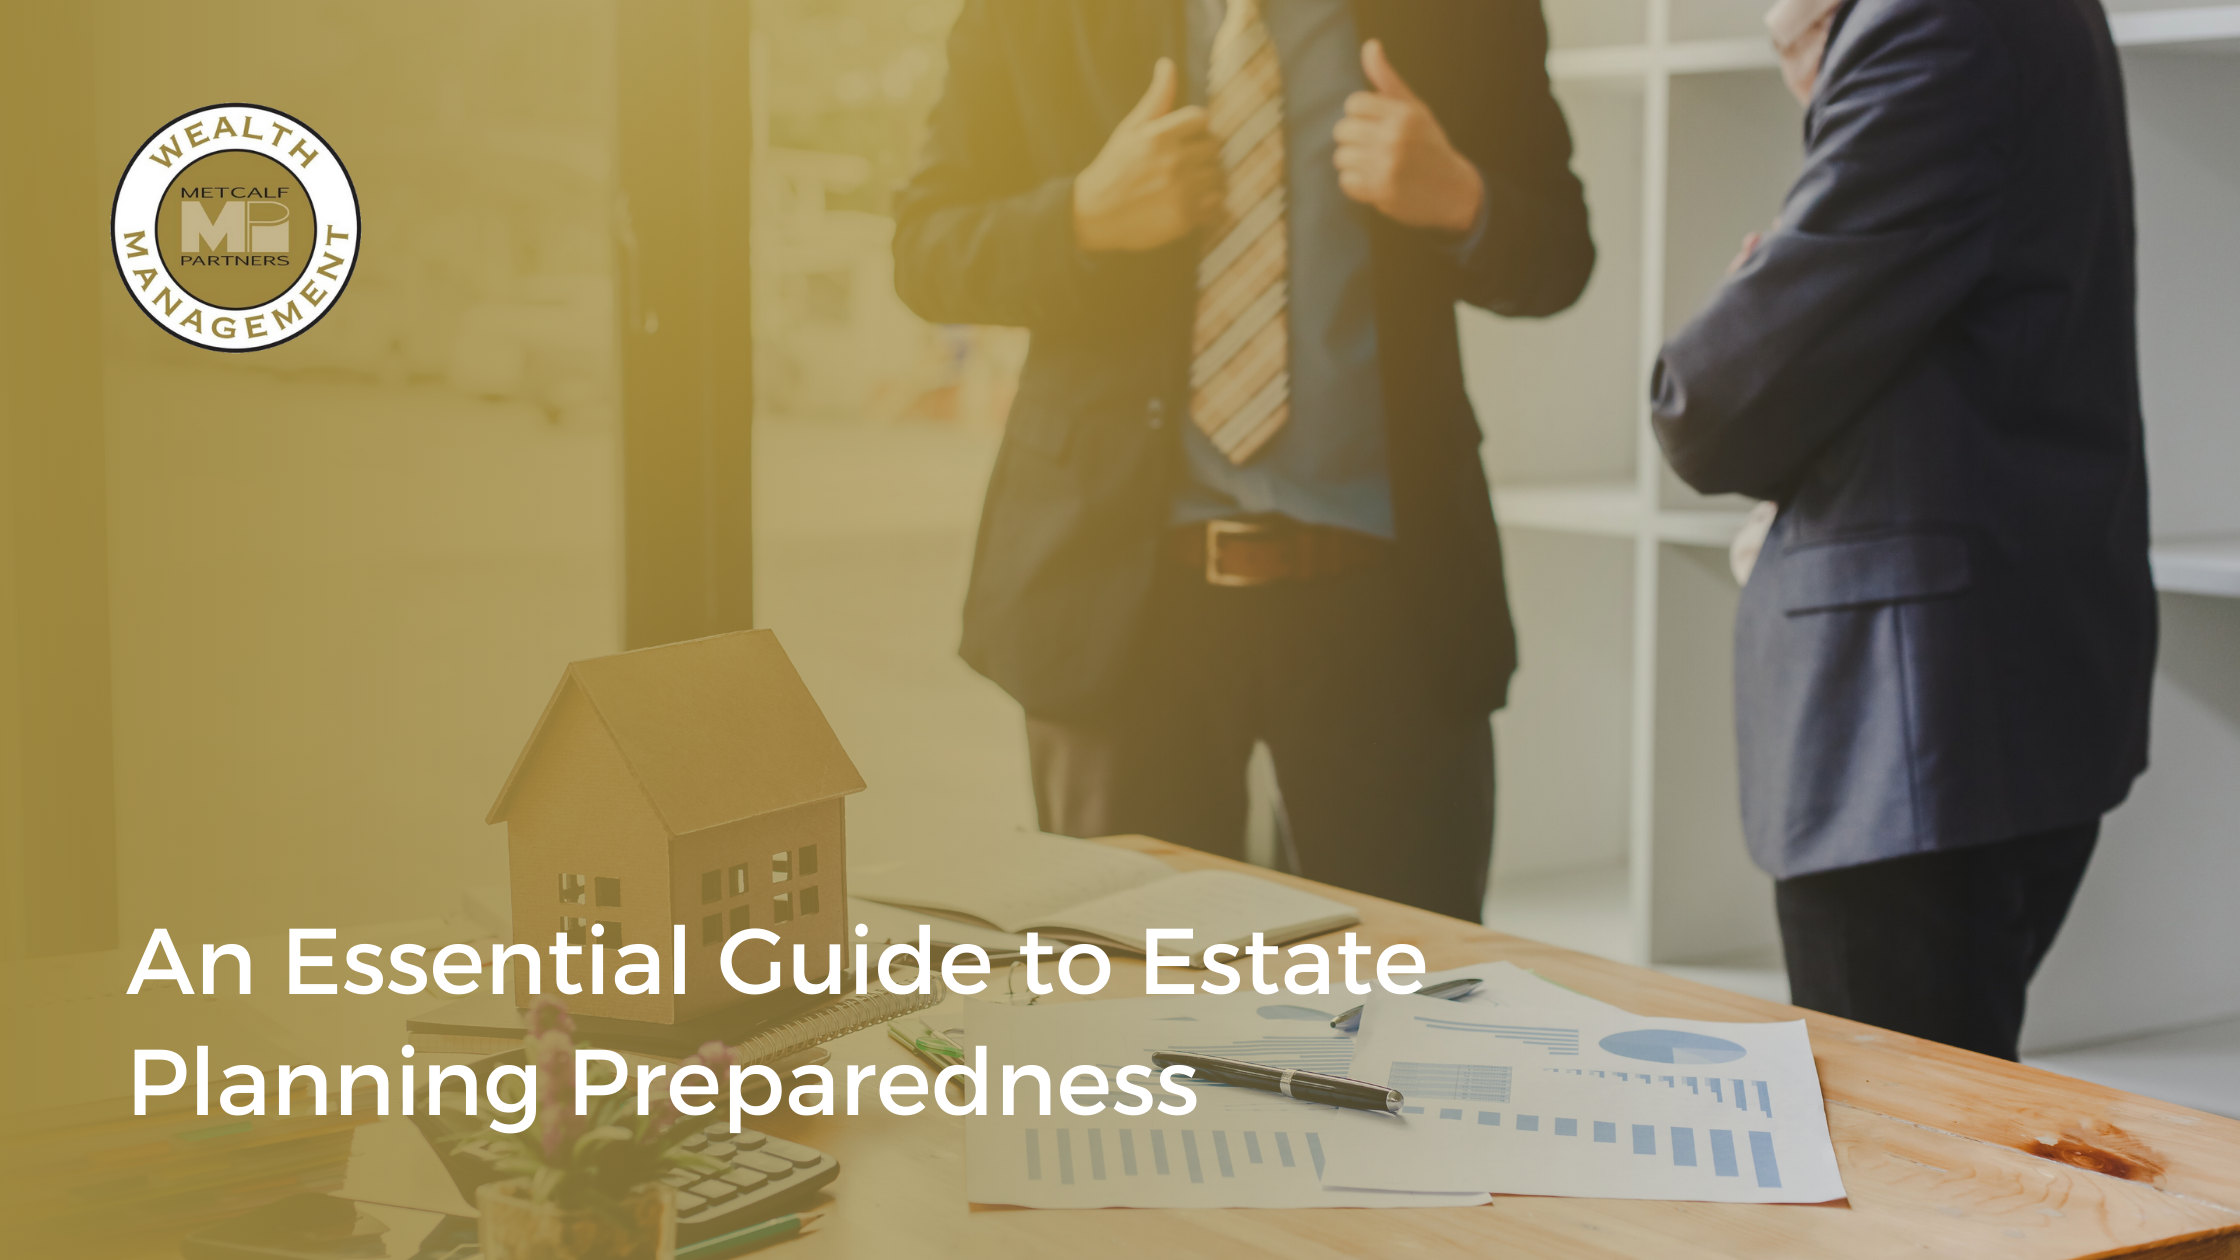 Featured image for “An Essential Guide to Estate Planning Preparedness”